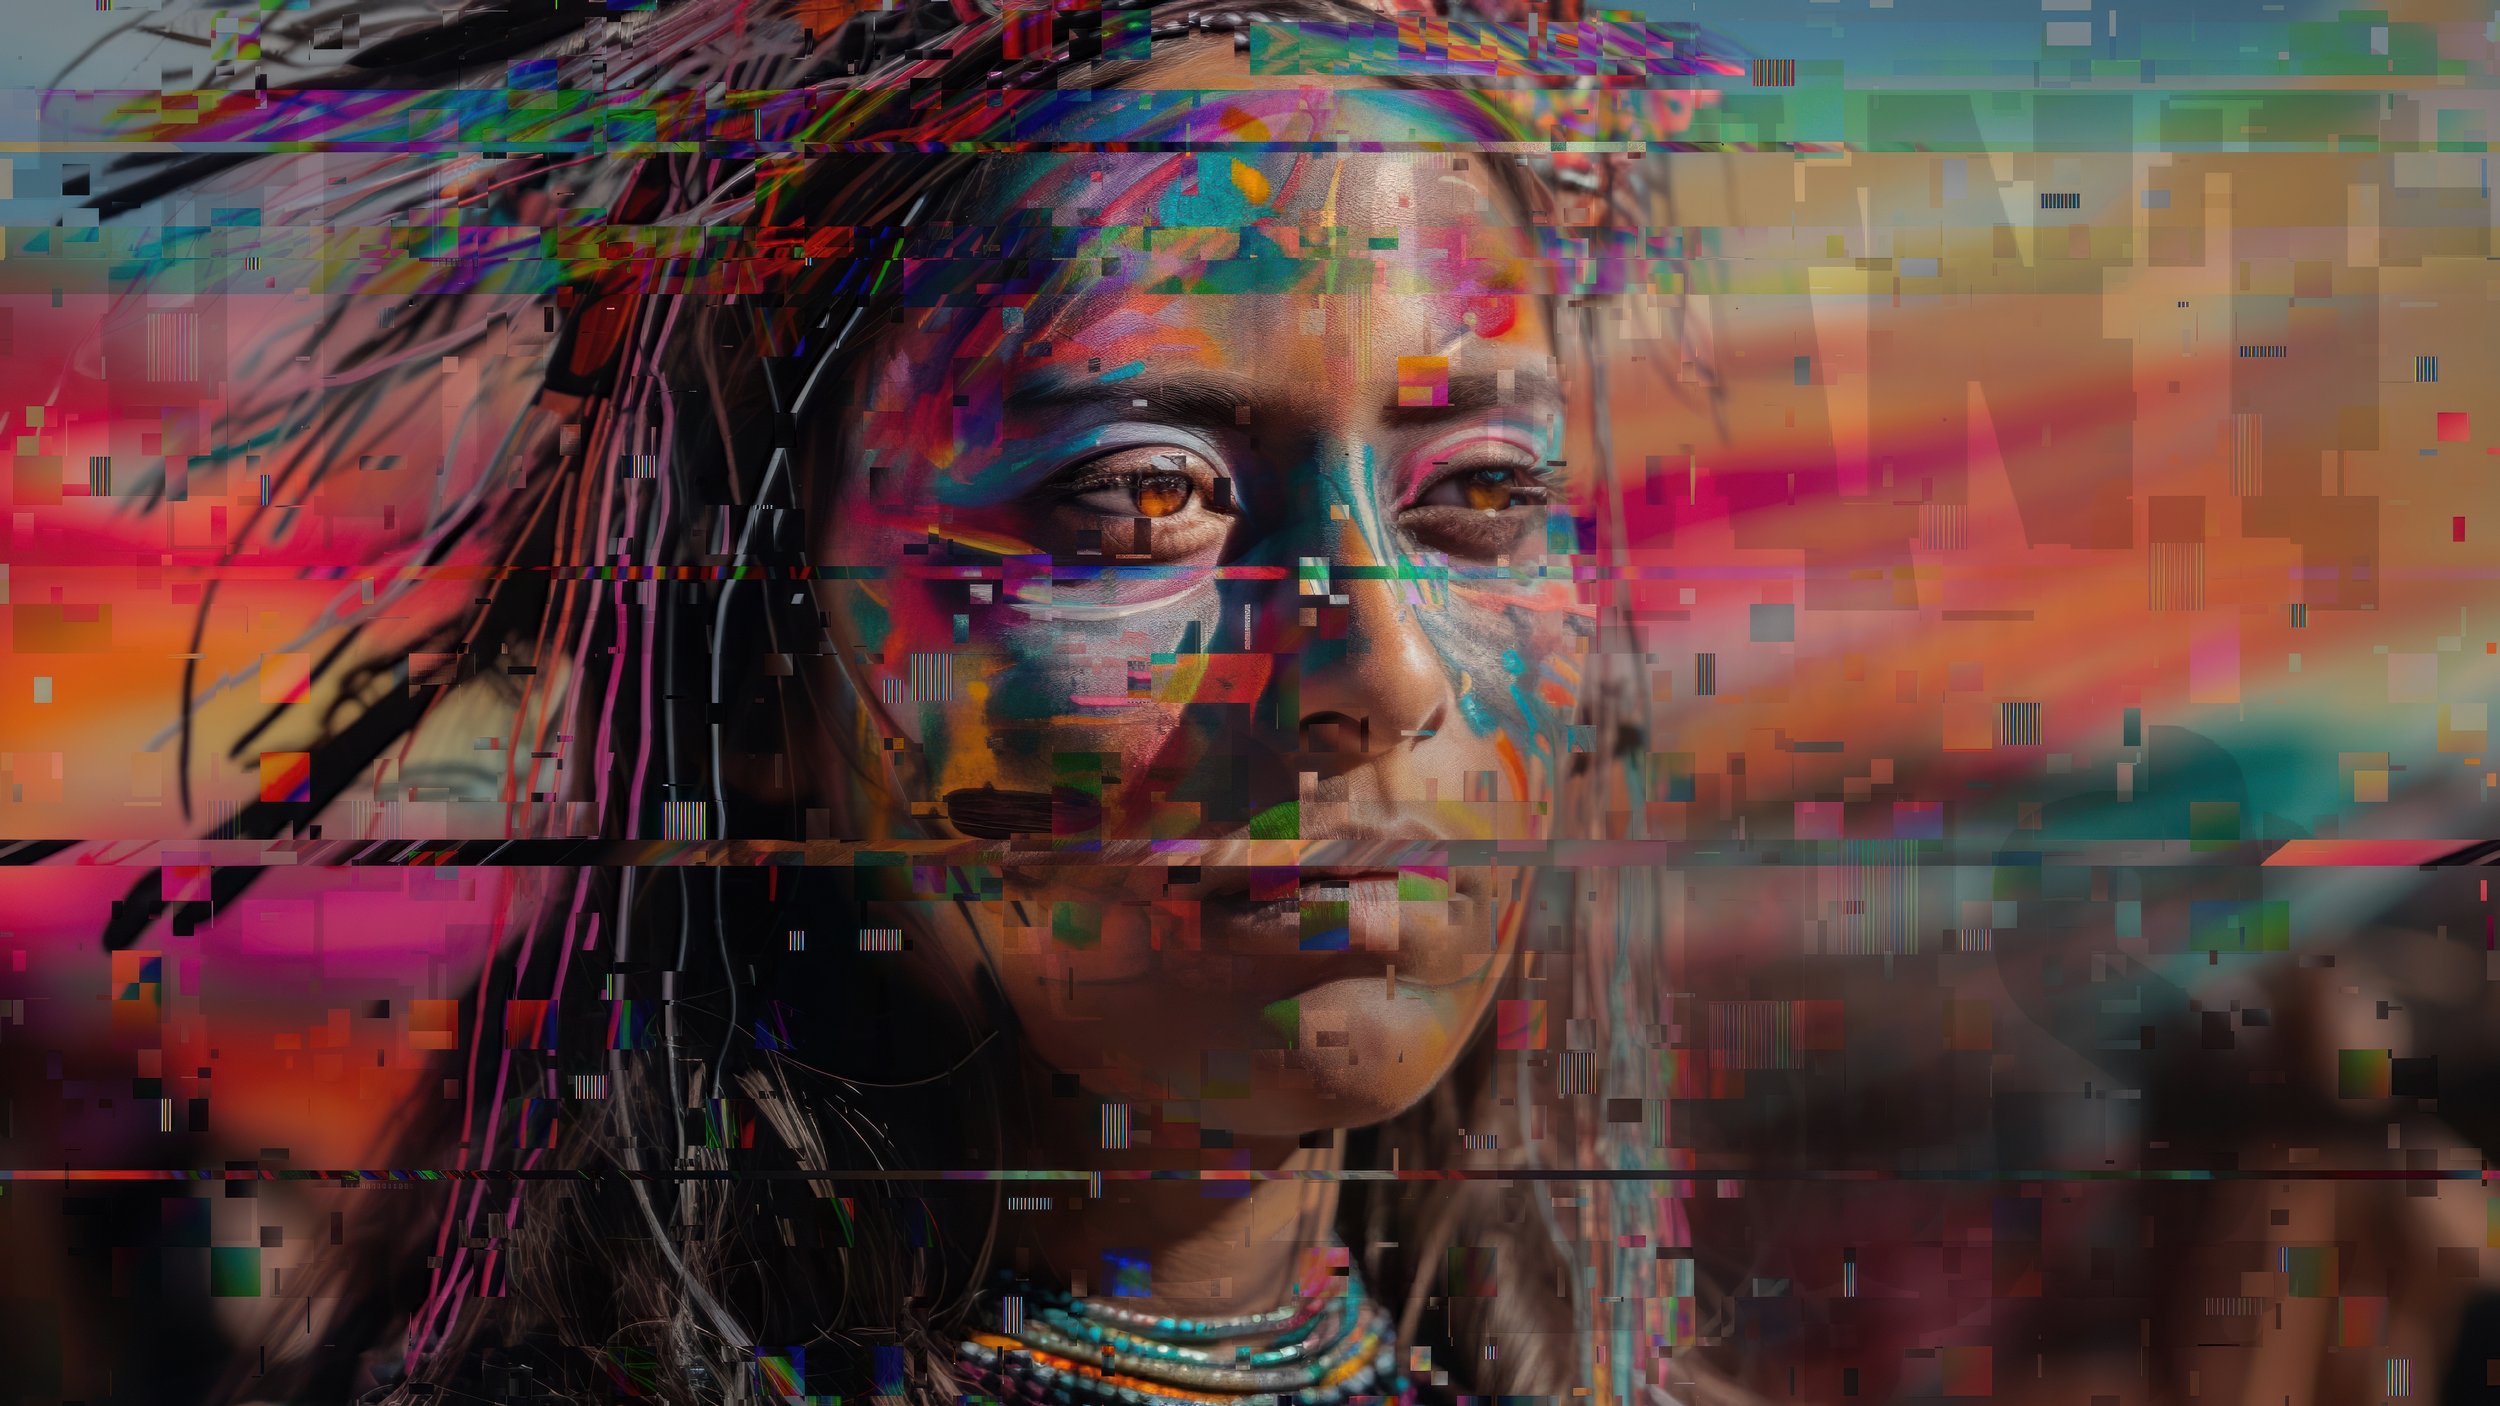 Get Distorted: Delving Into The Digital Image Glitch Effect